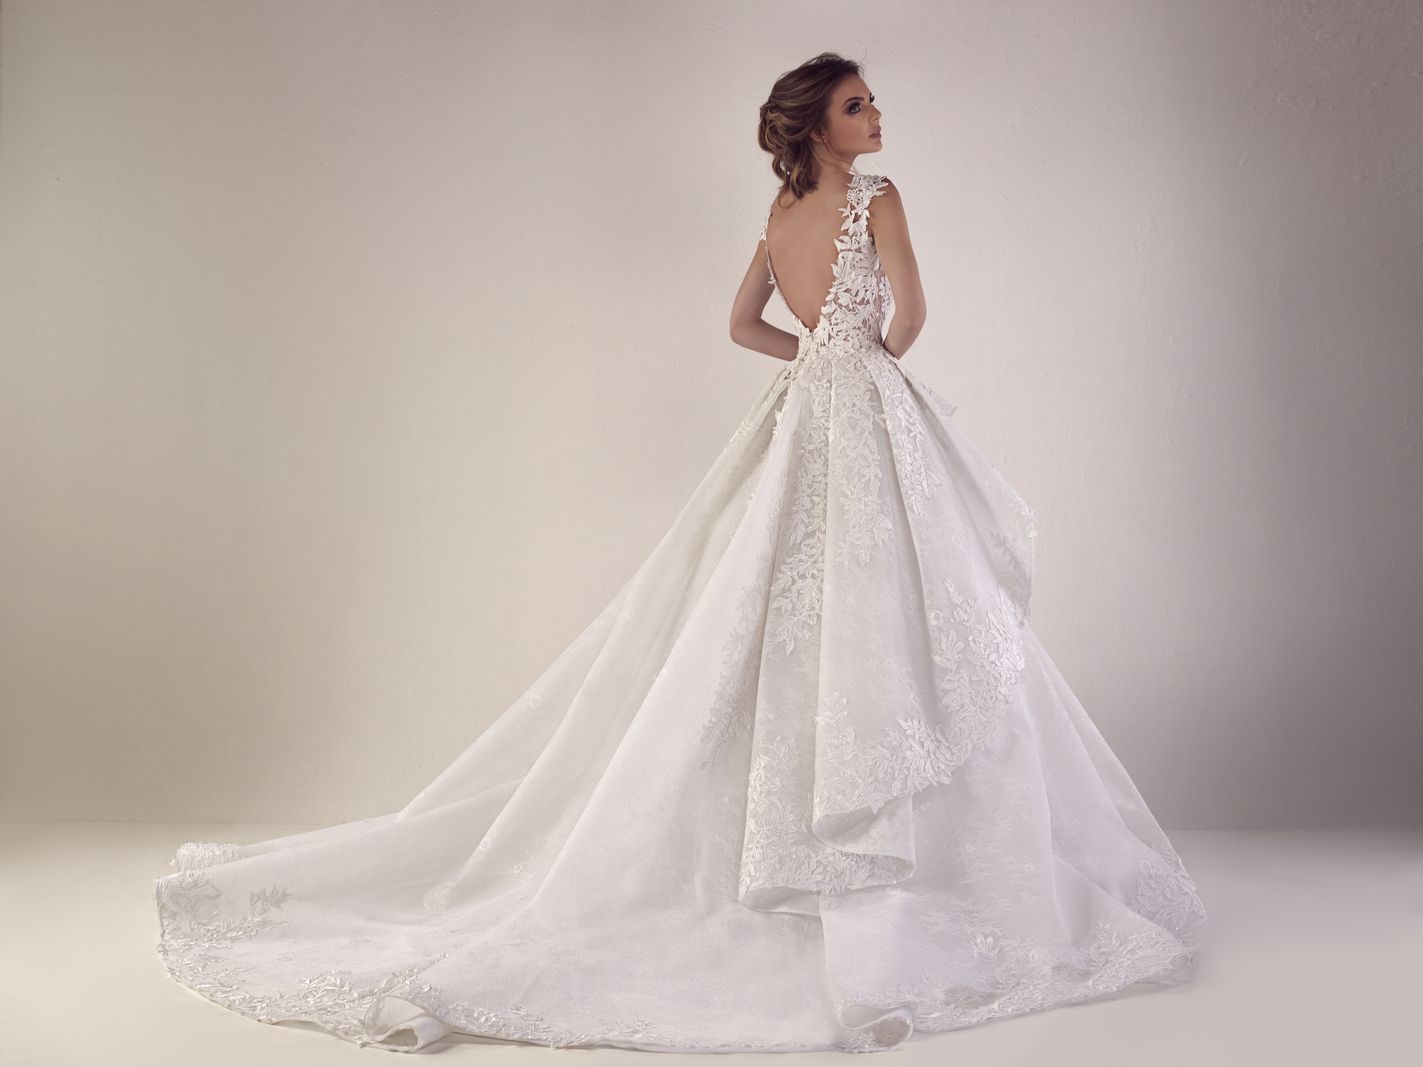 Romantic and dreamy Wedding dresses and gowns I Beirut - Lebanon